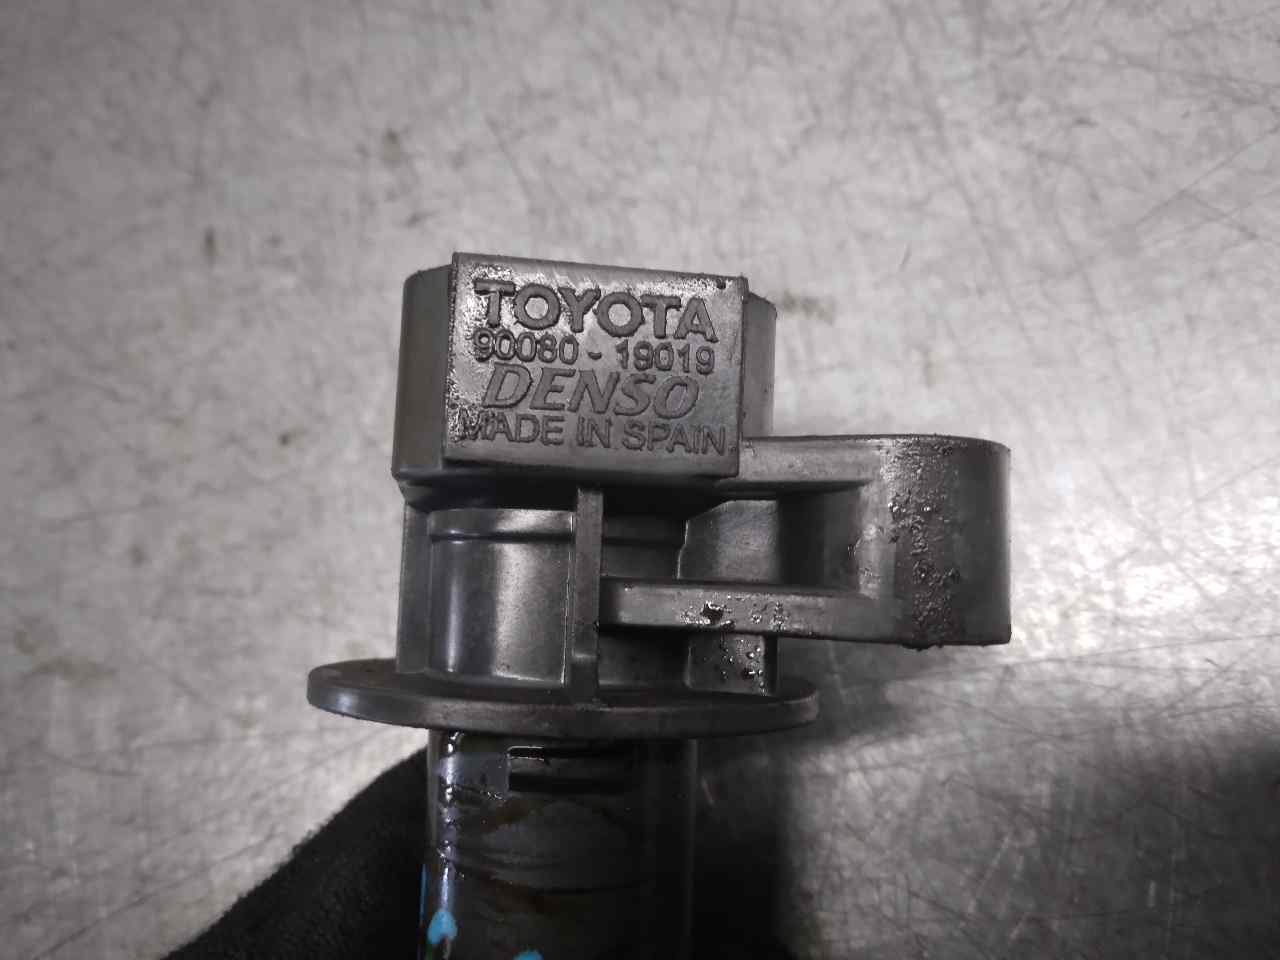 TOYOTA Corolla Verso 1 generation (2001-2009) High Voltage Ignition Coil 9008019019, DENSO 19831707